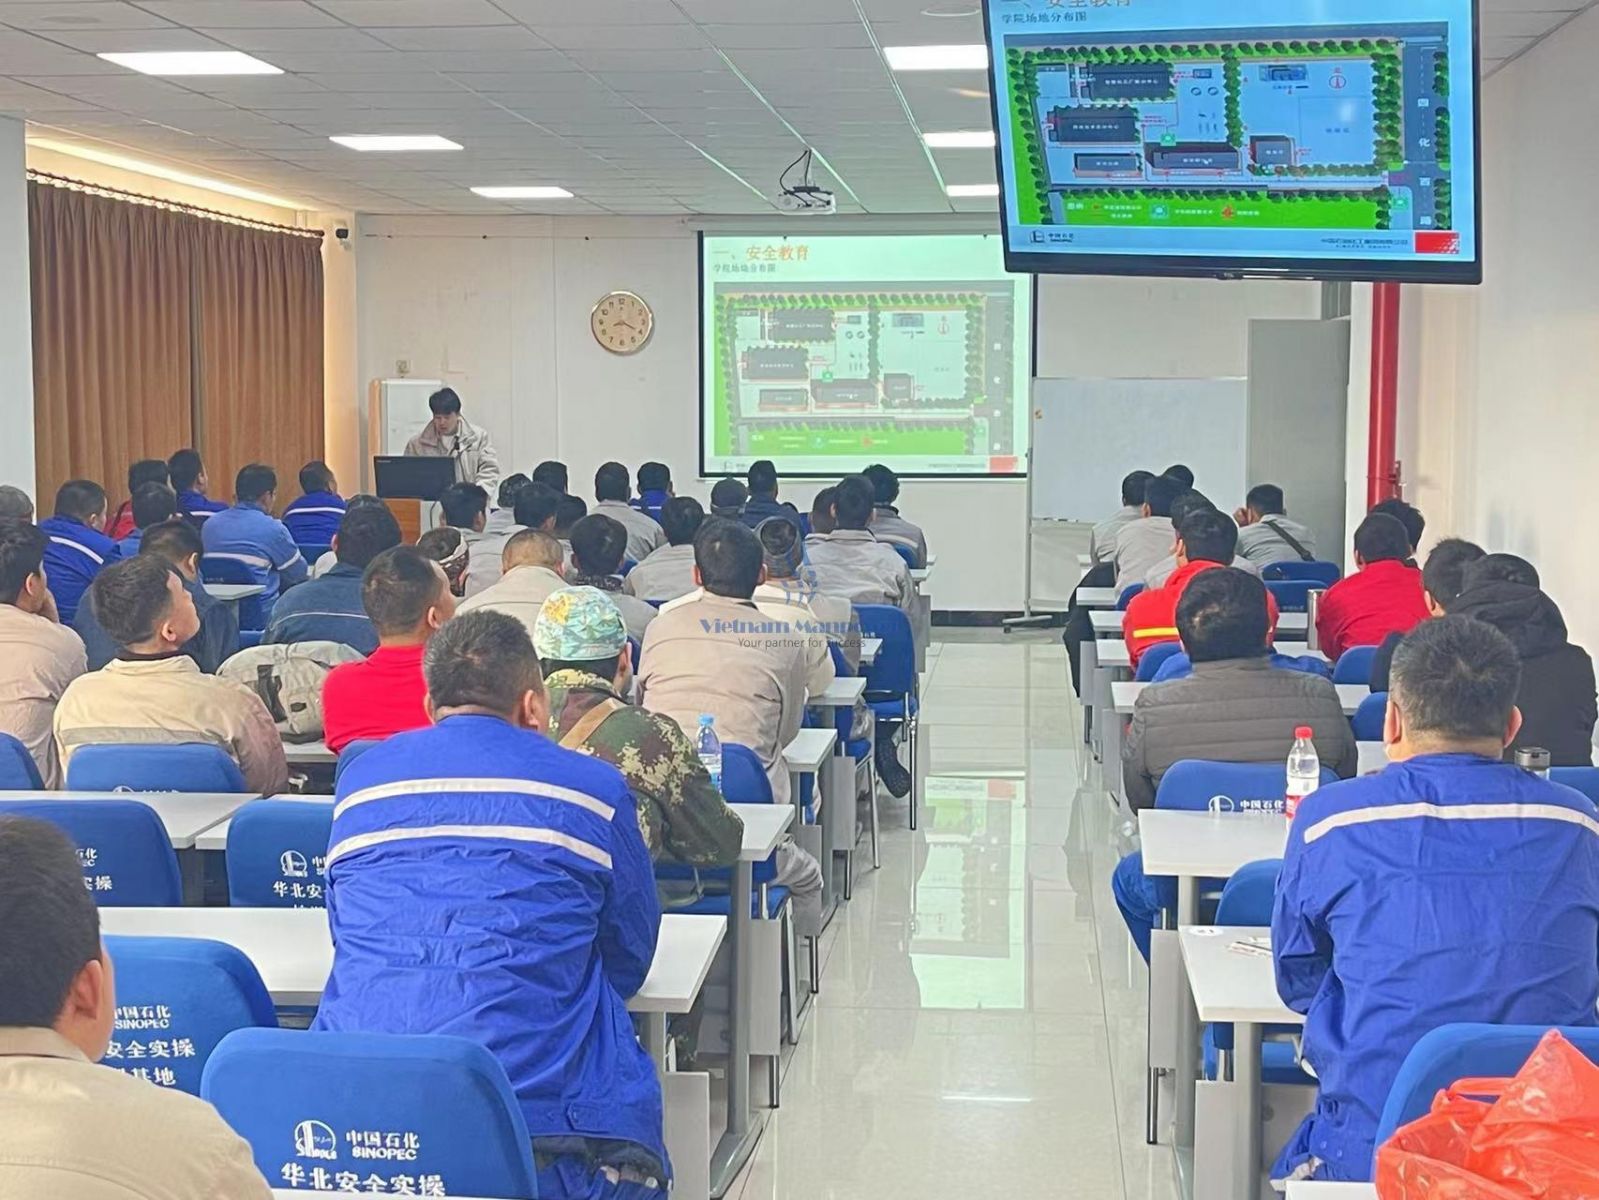 Vietnamese workers excel in rigorous skill assessment at Sinopec in China